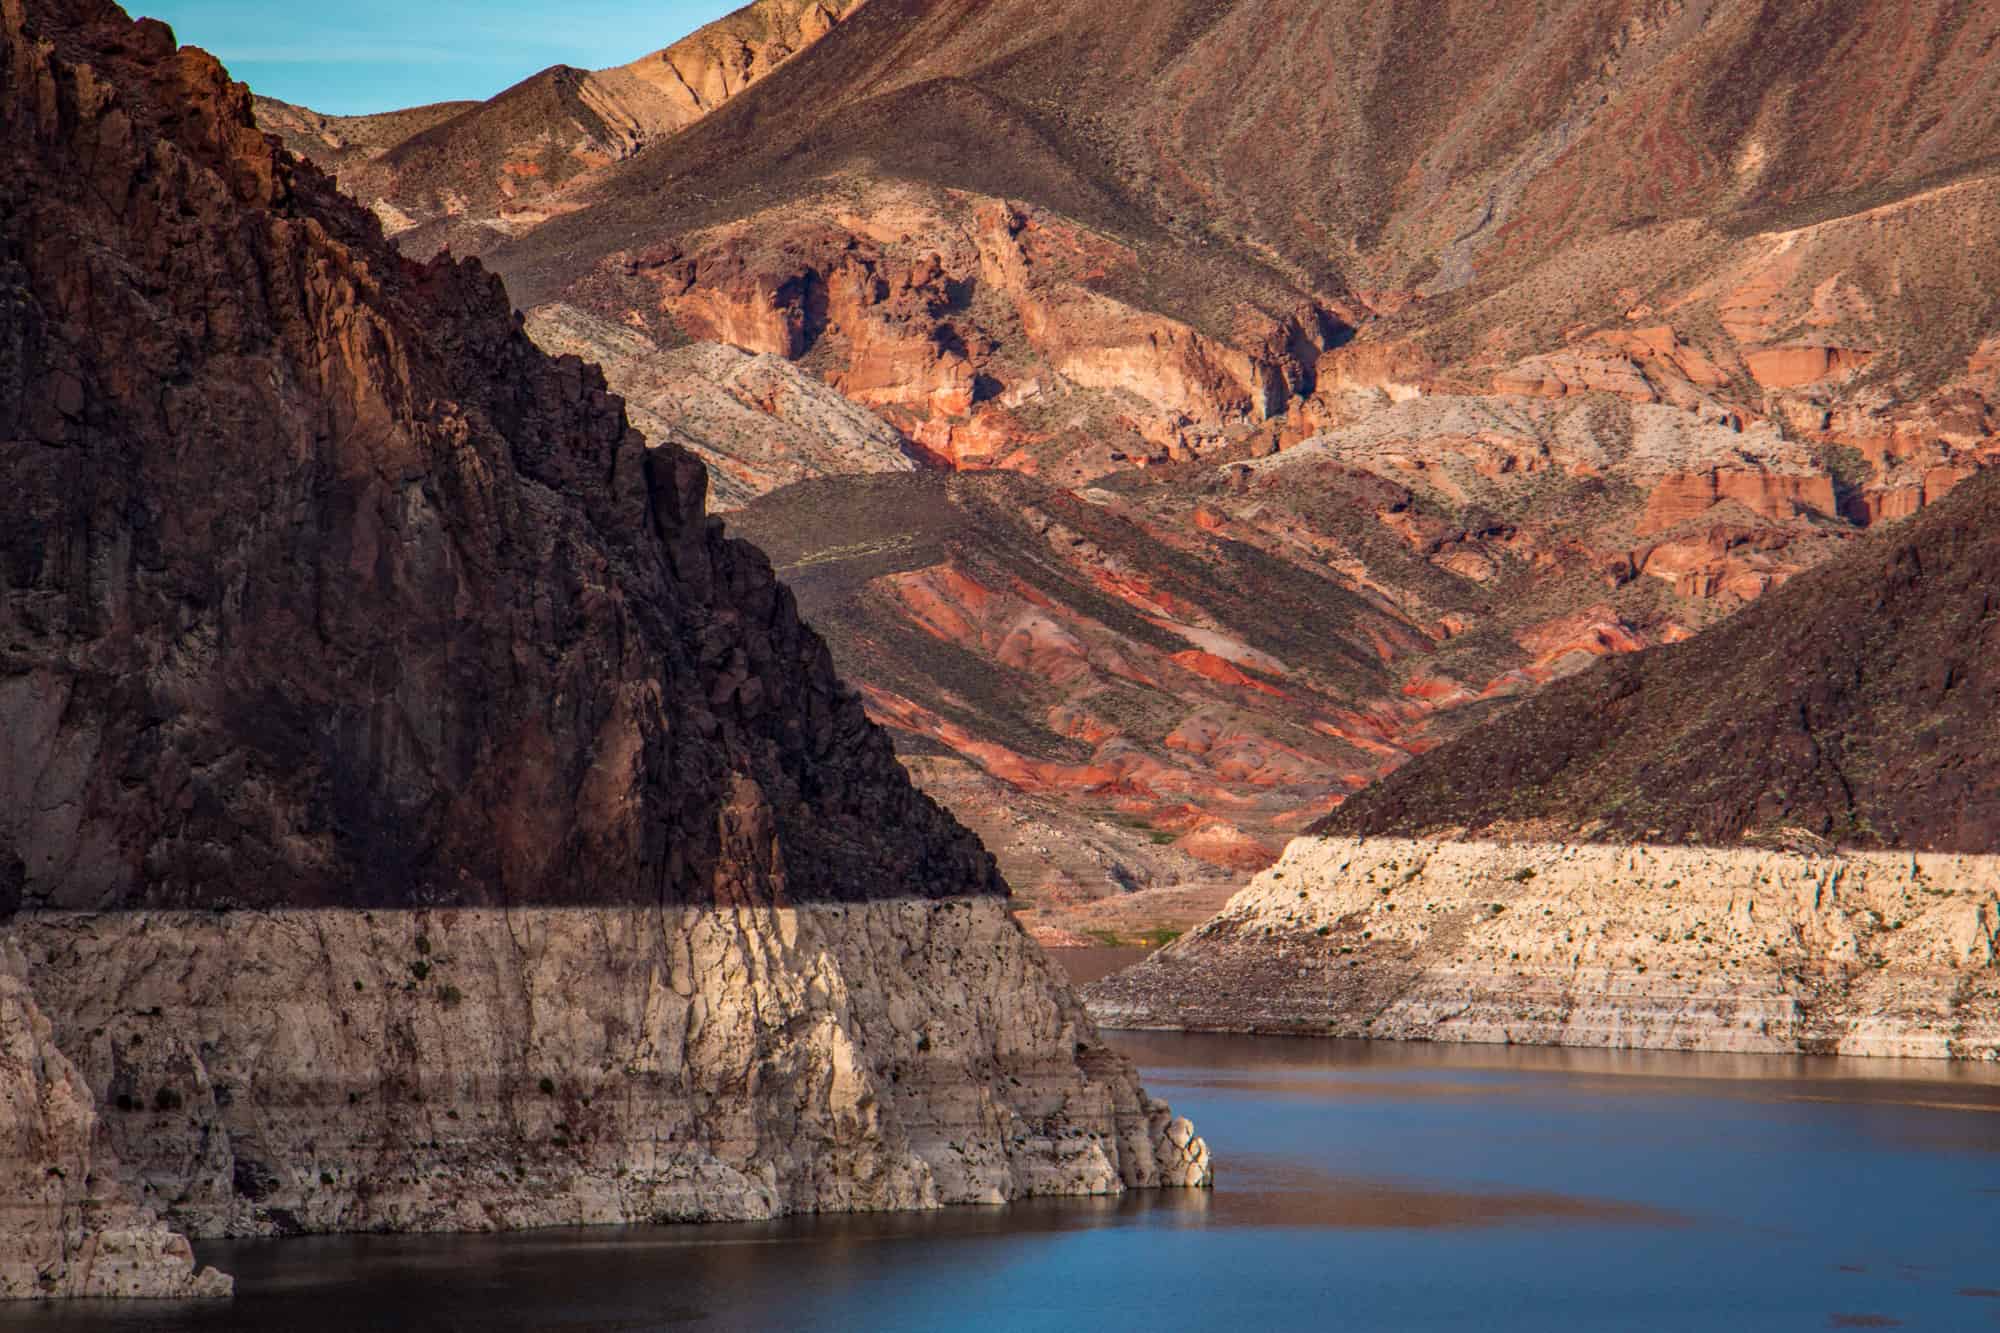 the rocky landscape around lake mead is beautiful with its multiple colored layers and calm waters